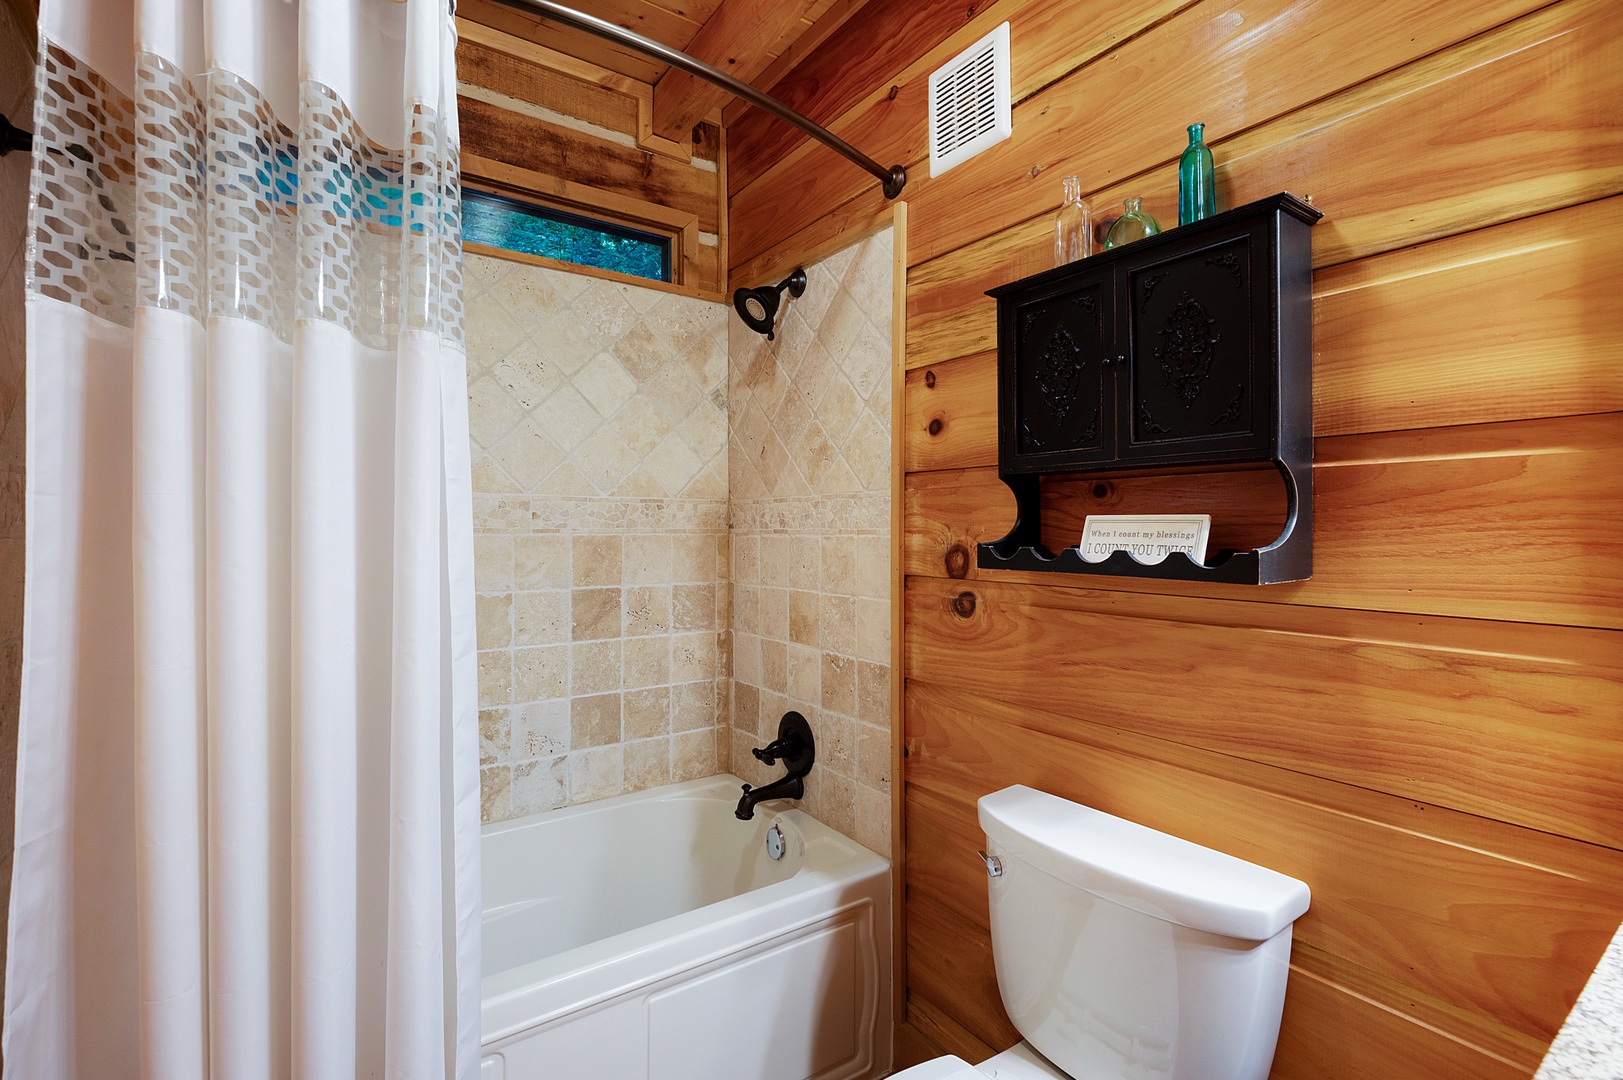 Mountaintown Creek Lodge - Entry Level Guest Bedroom's Bathroom